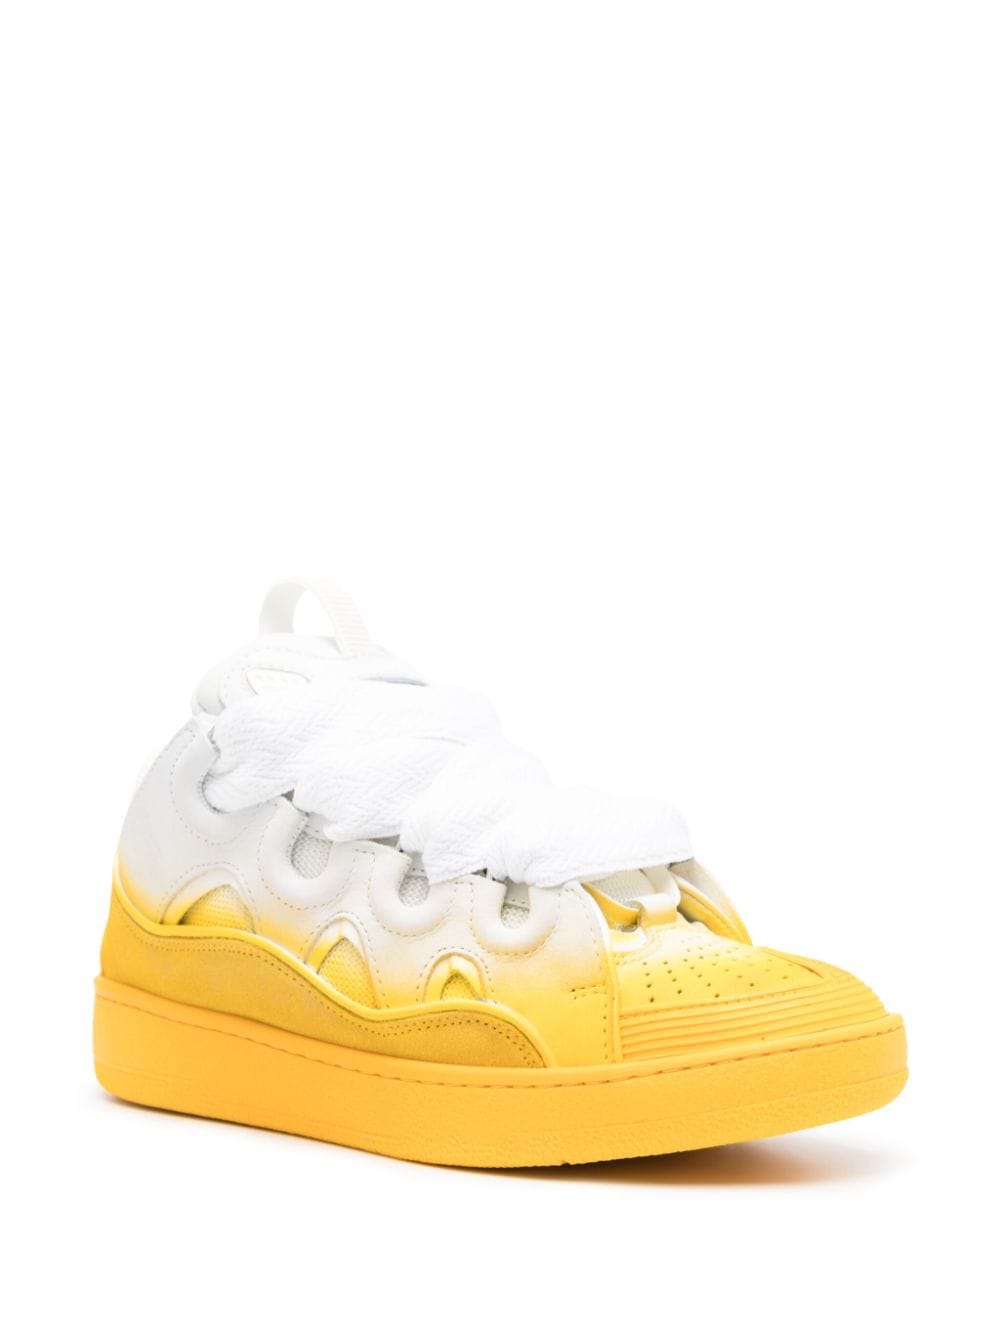 Image 2 of Lanvin spray-painted Curb sneakers